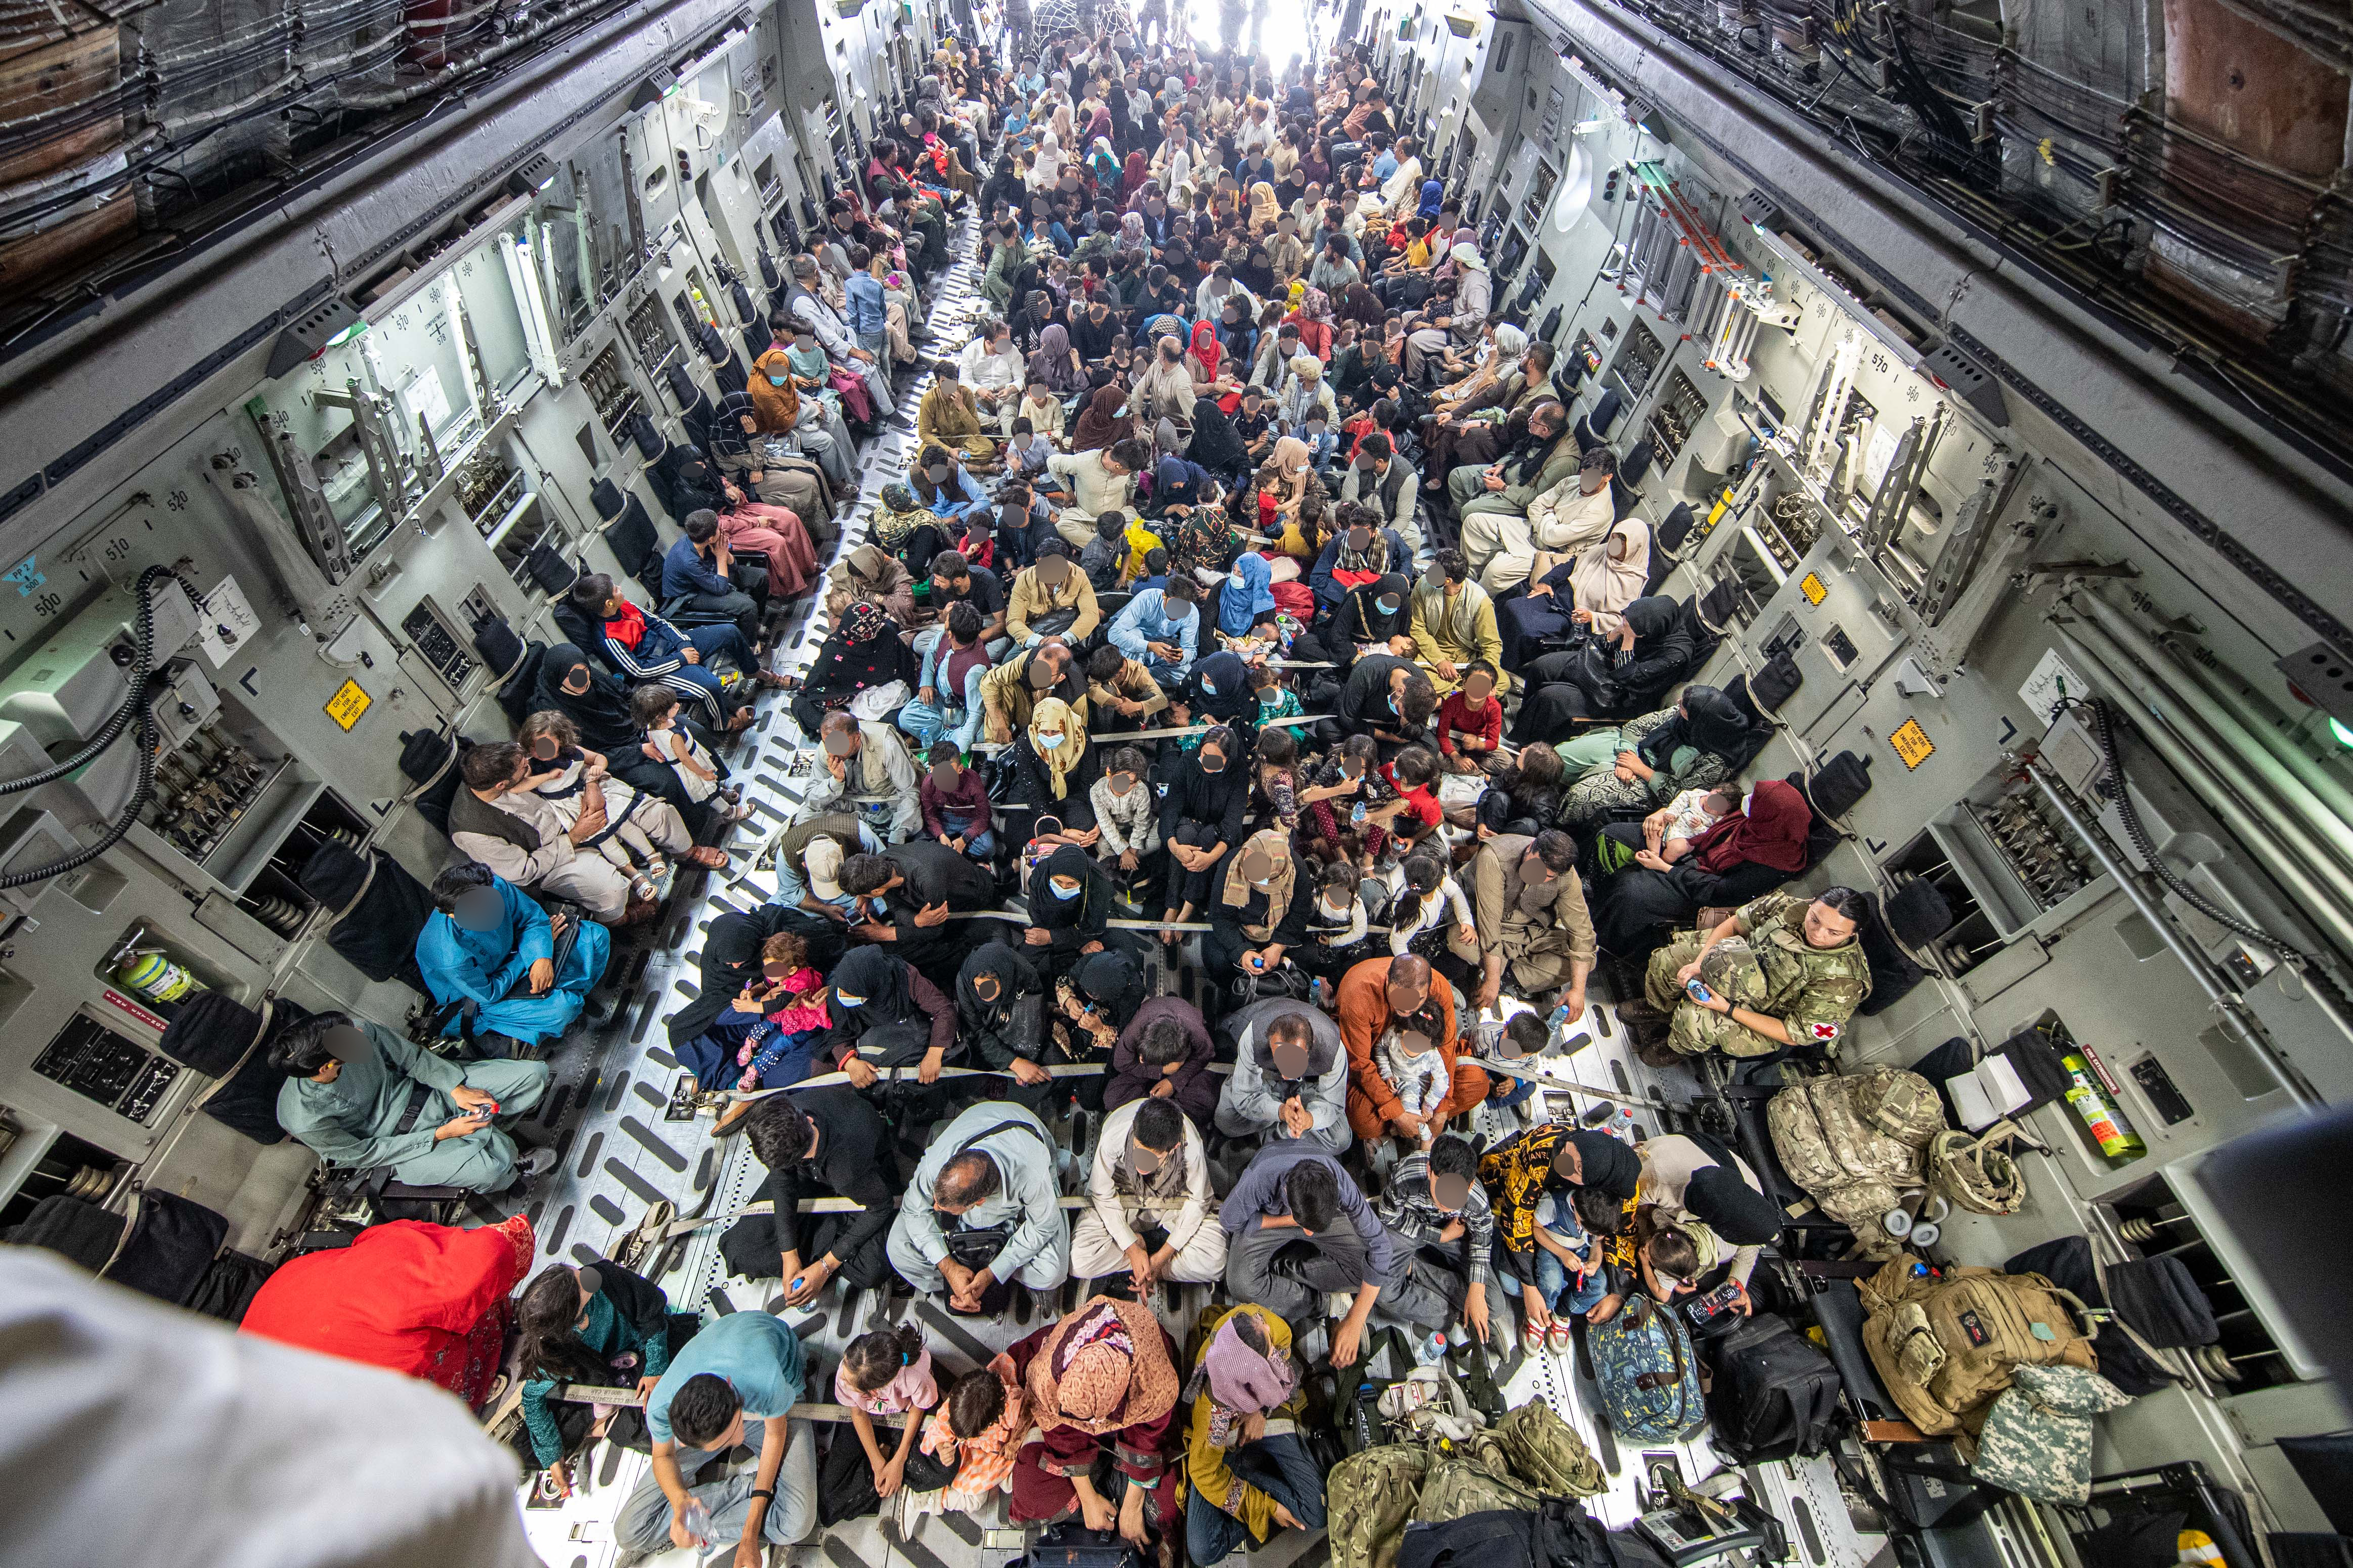 Afghan evacuees and Aviators inside carrier aircraft.